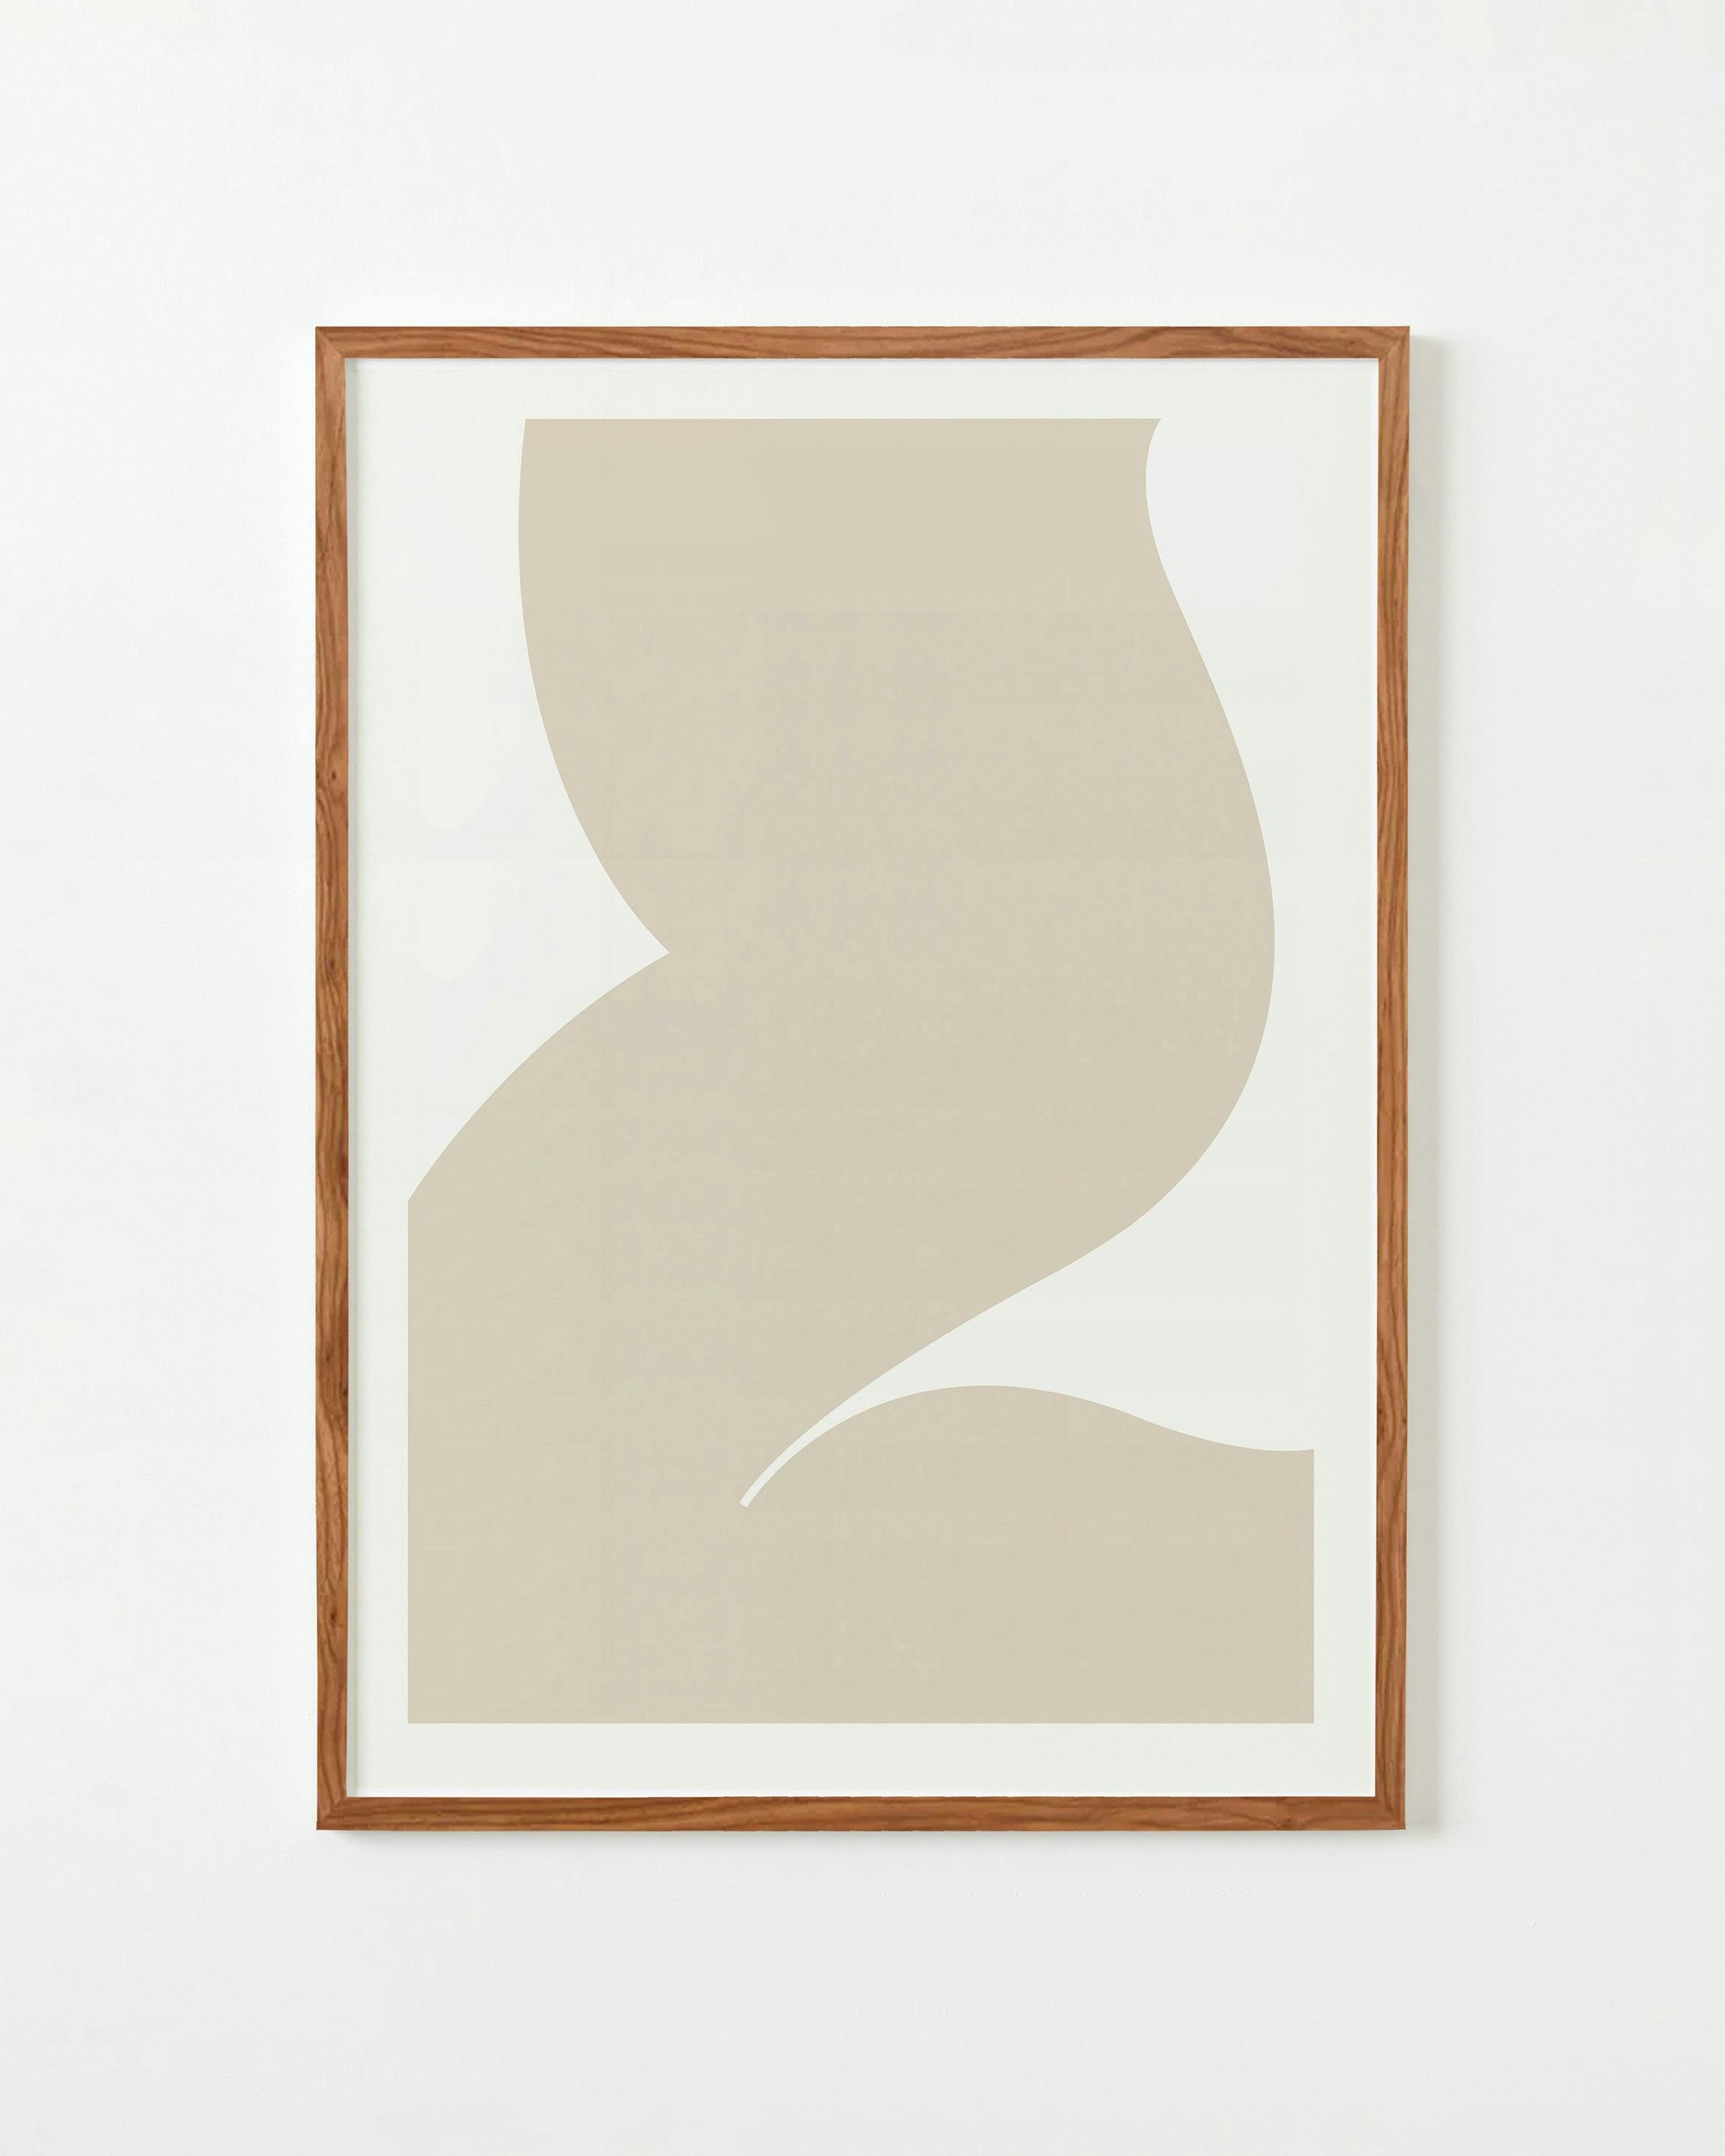 Print by Caroline Walls titled "Silhouette I (Neutral Stone)".